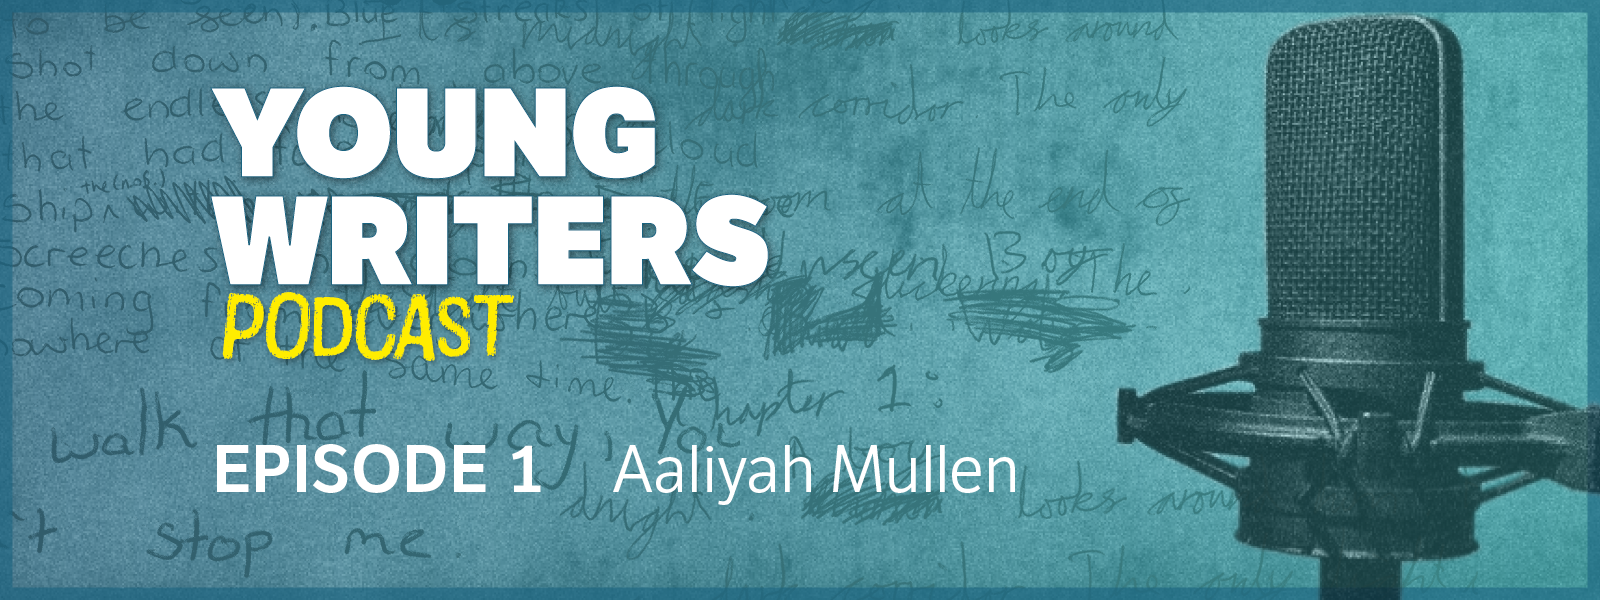 Young Writers Podcast header